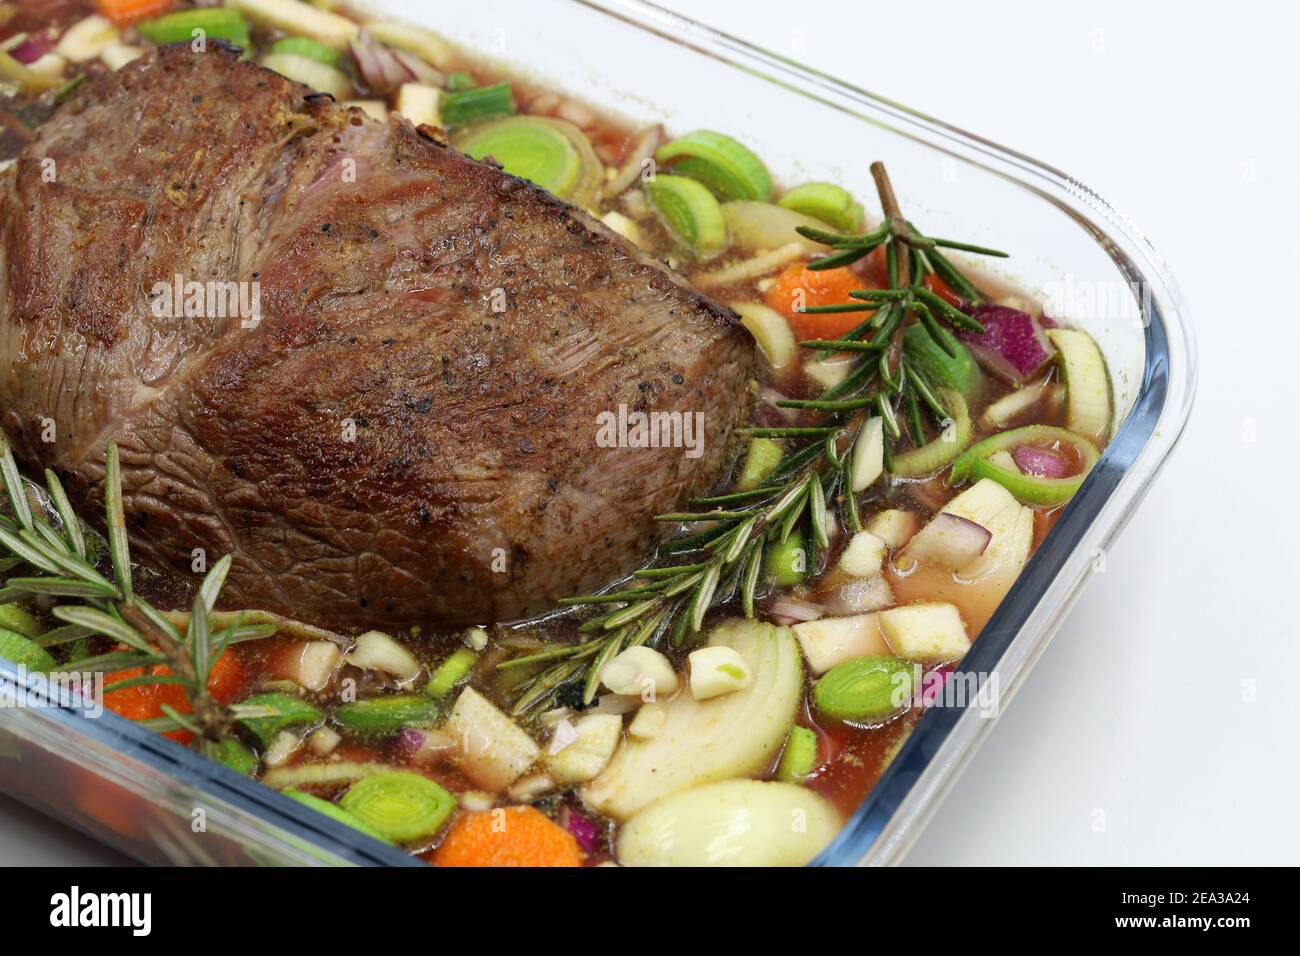 Beef steak with twig rosemary and vegetables in glass bowl isolated on white background Stock Photo